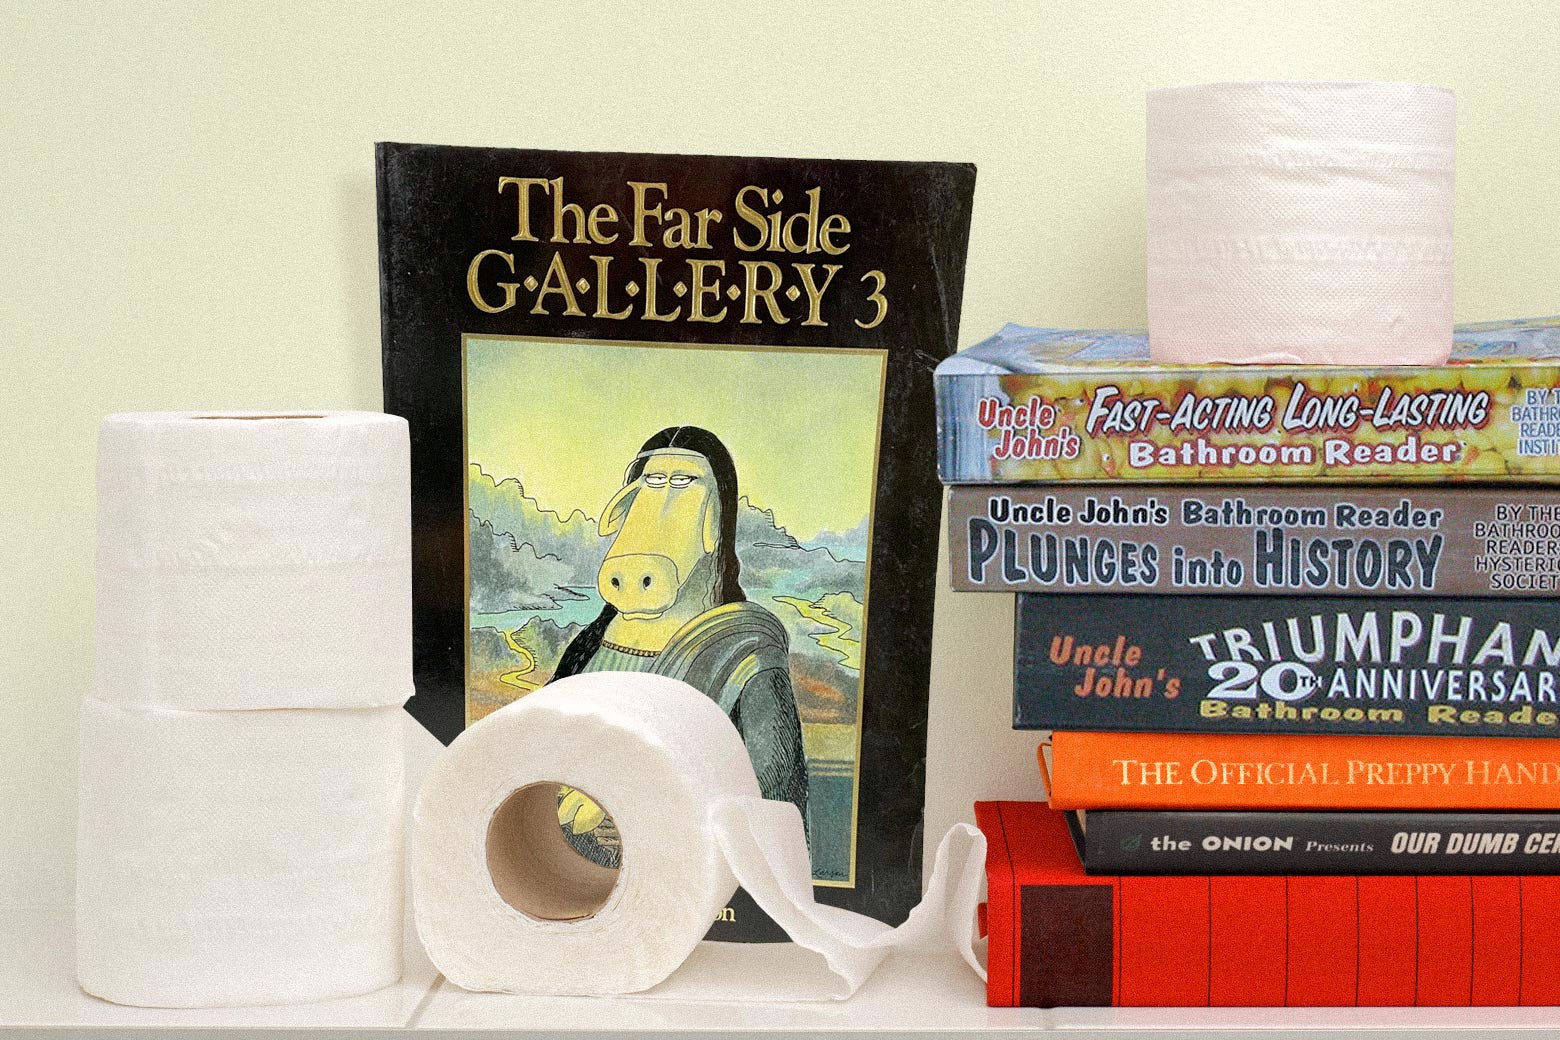 Several books on top of a toilet tank, with toilet paper rolls next to them. 